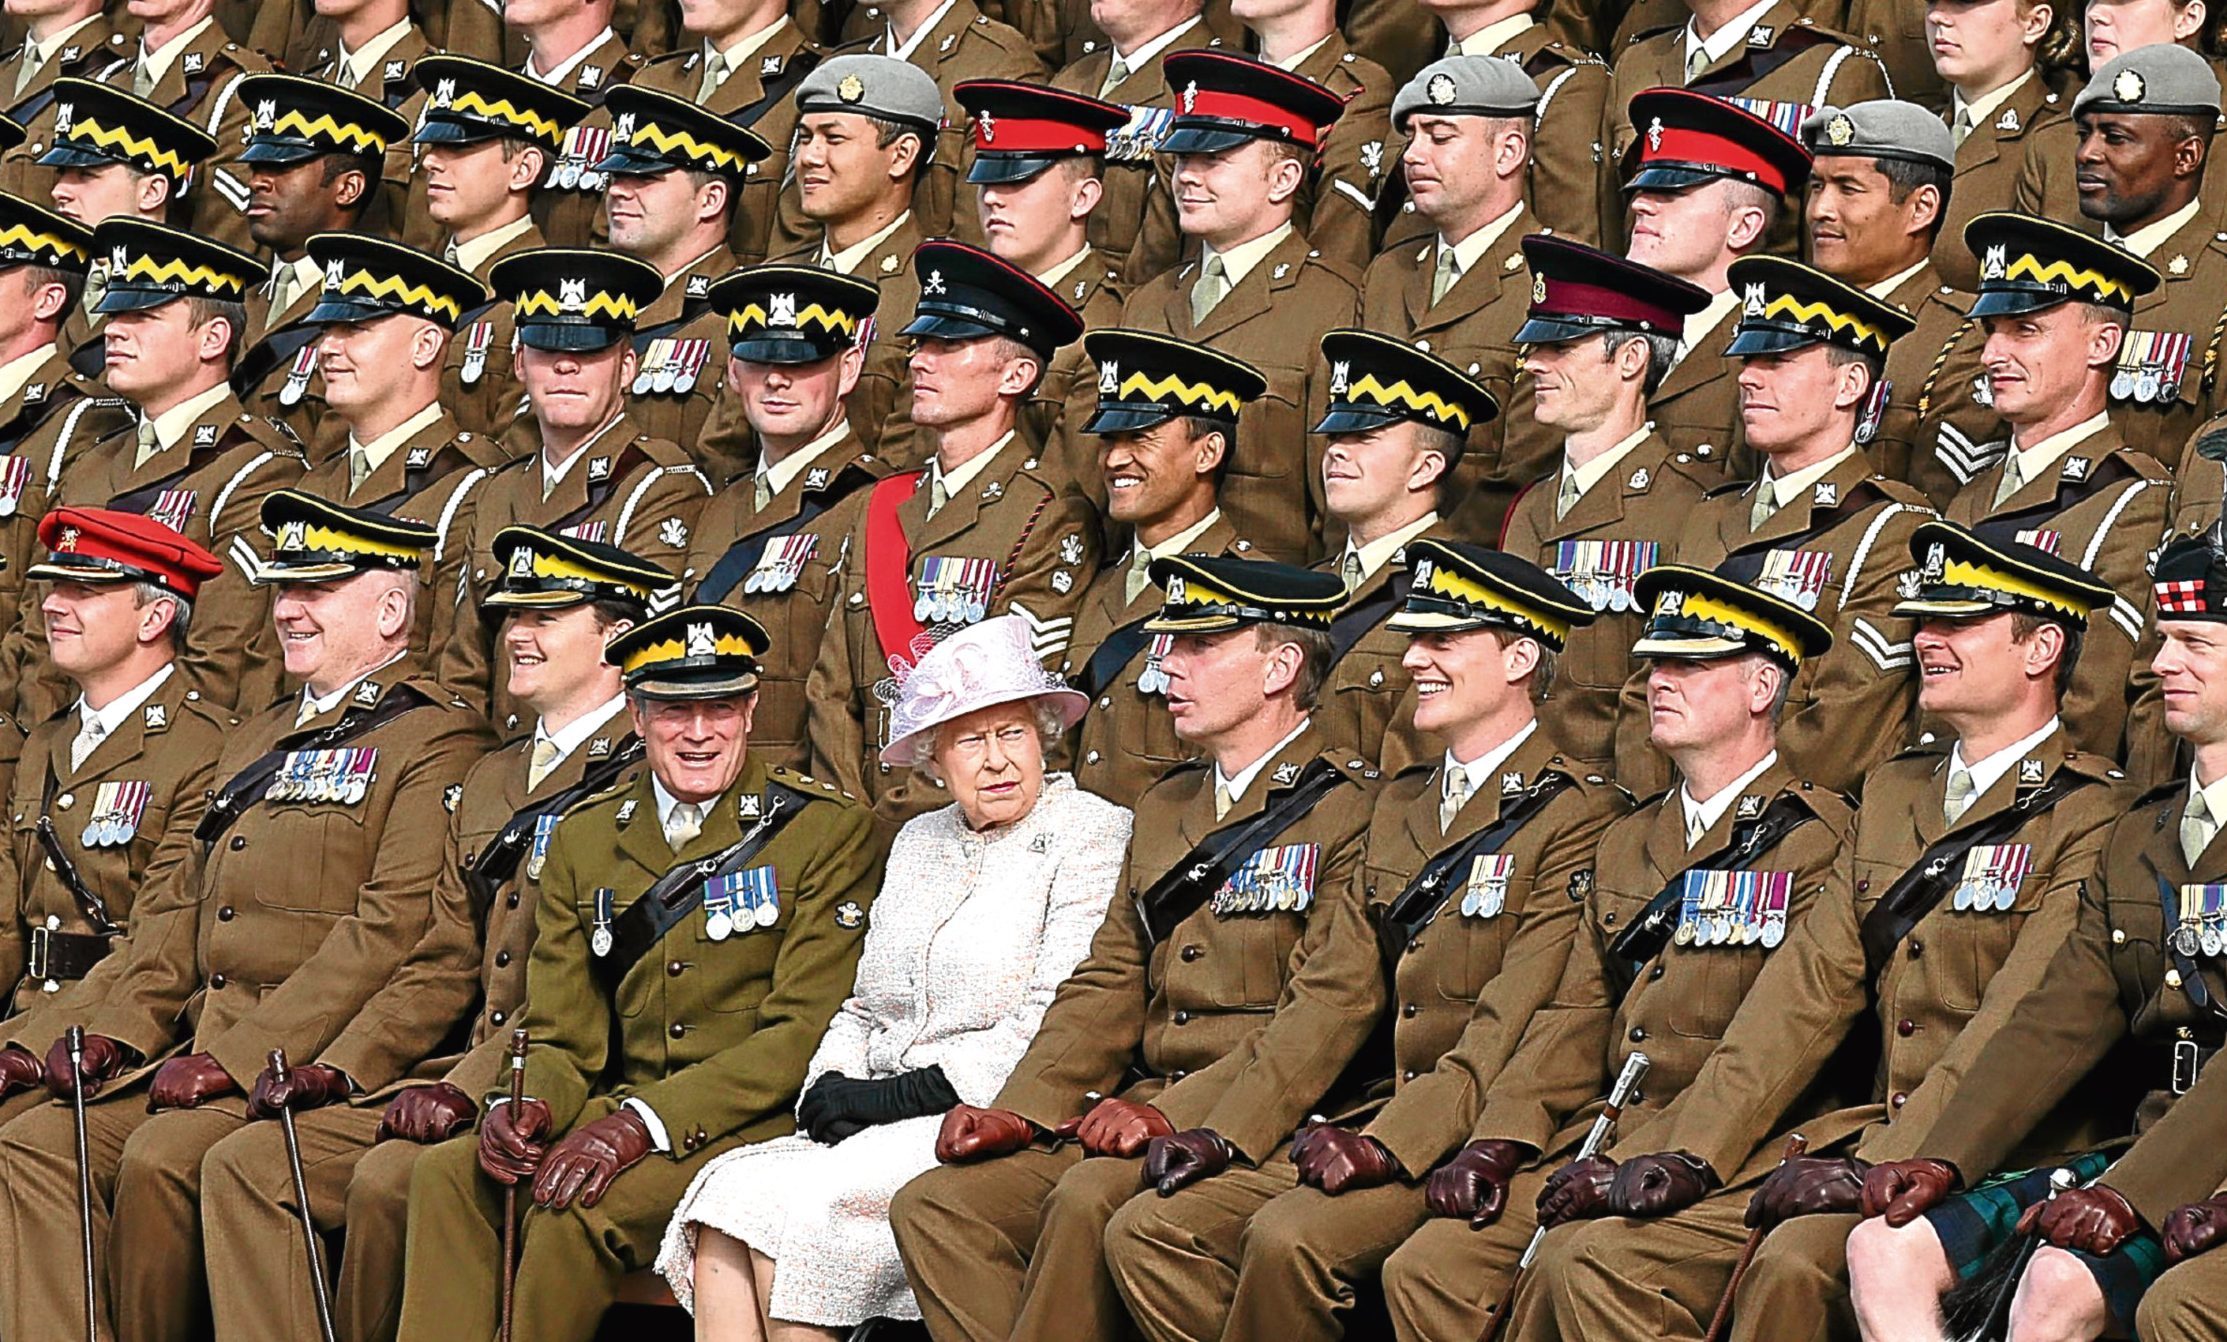 The Queen joins soldiers for a regimental photograph during a visit to the Royal Scots Dragoon Guards at the regiment's new barracks in Leuchars.